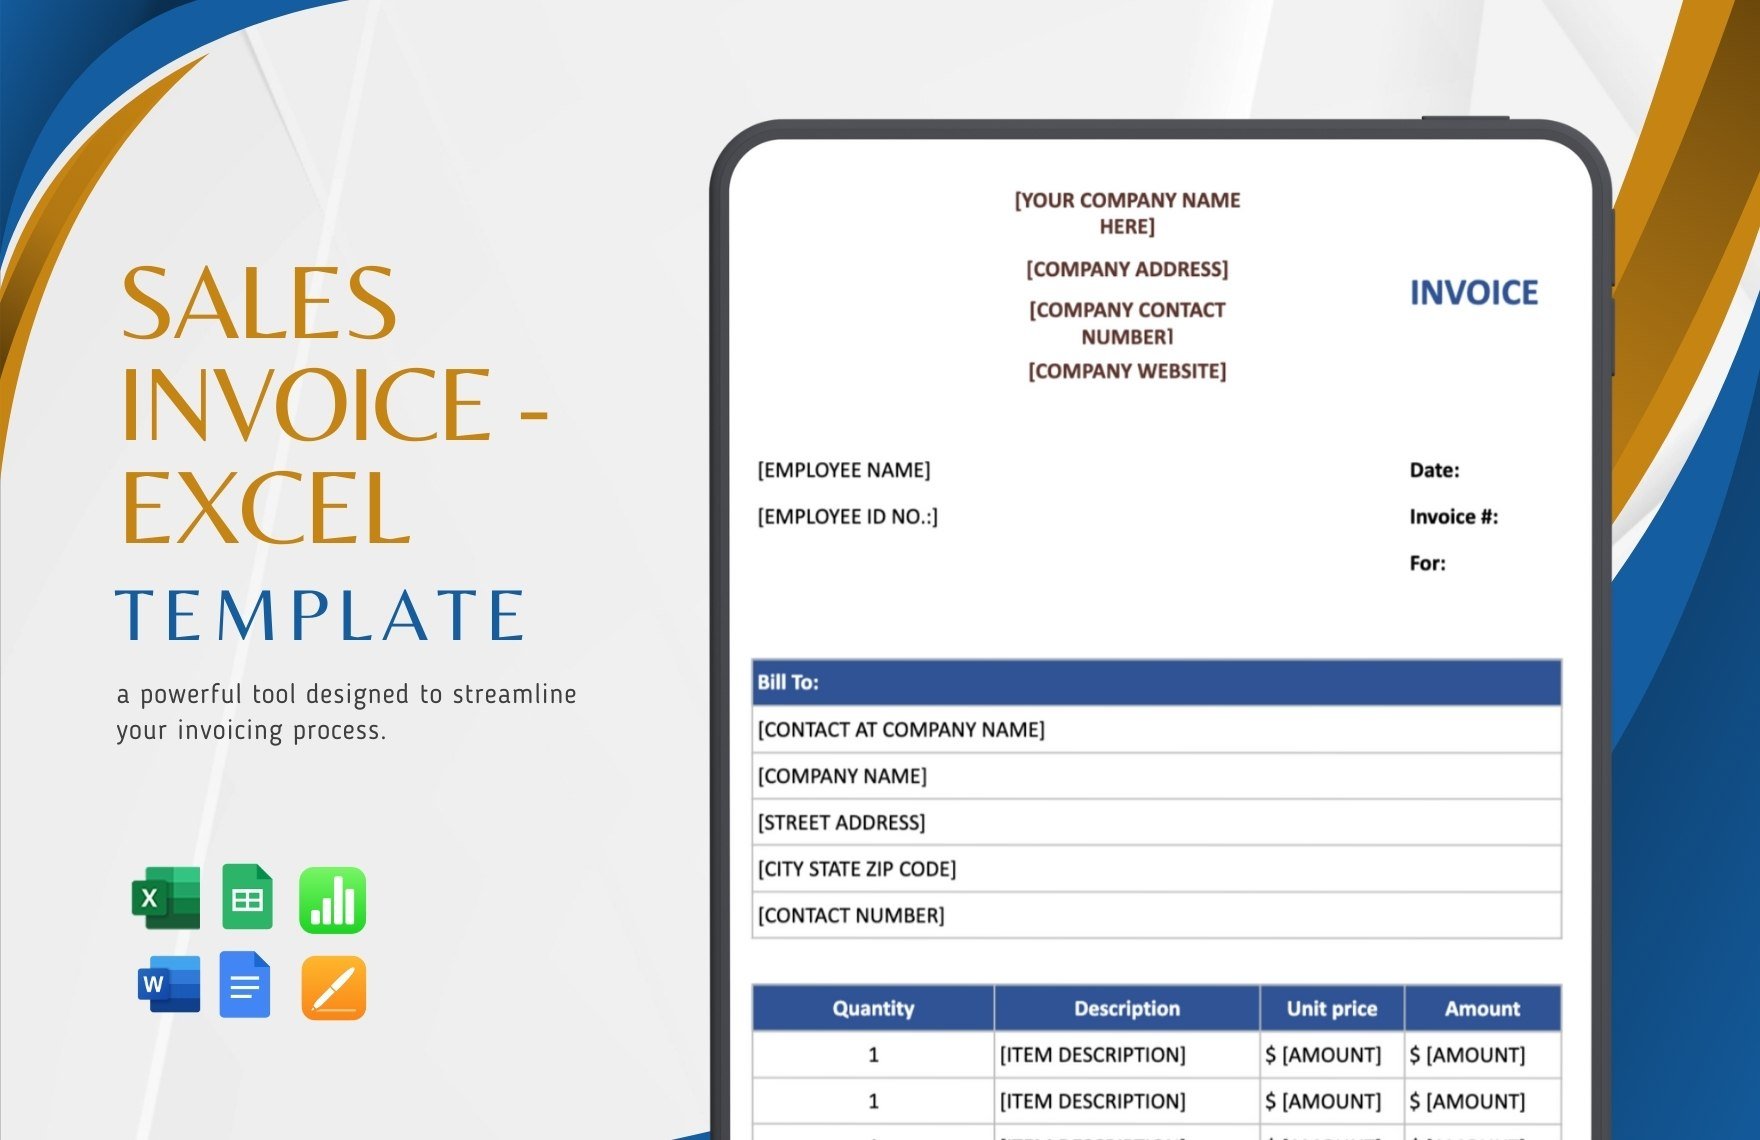 Sales Invoice - Excel Template in Word, Google Docs, Excel, Google Sheets, Apple Pages, Apple Numbers